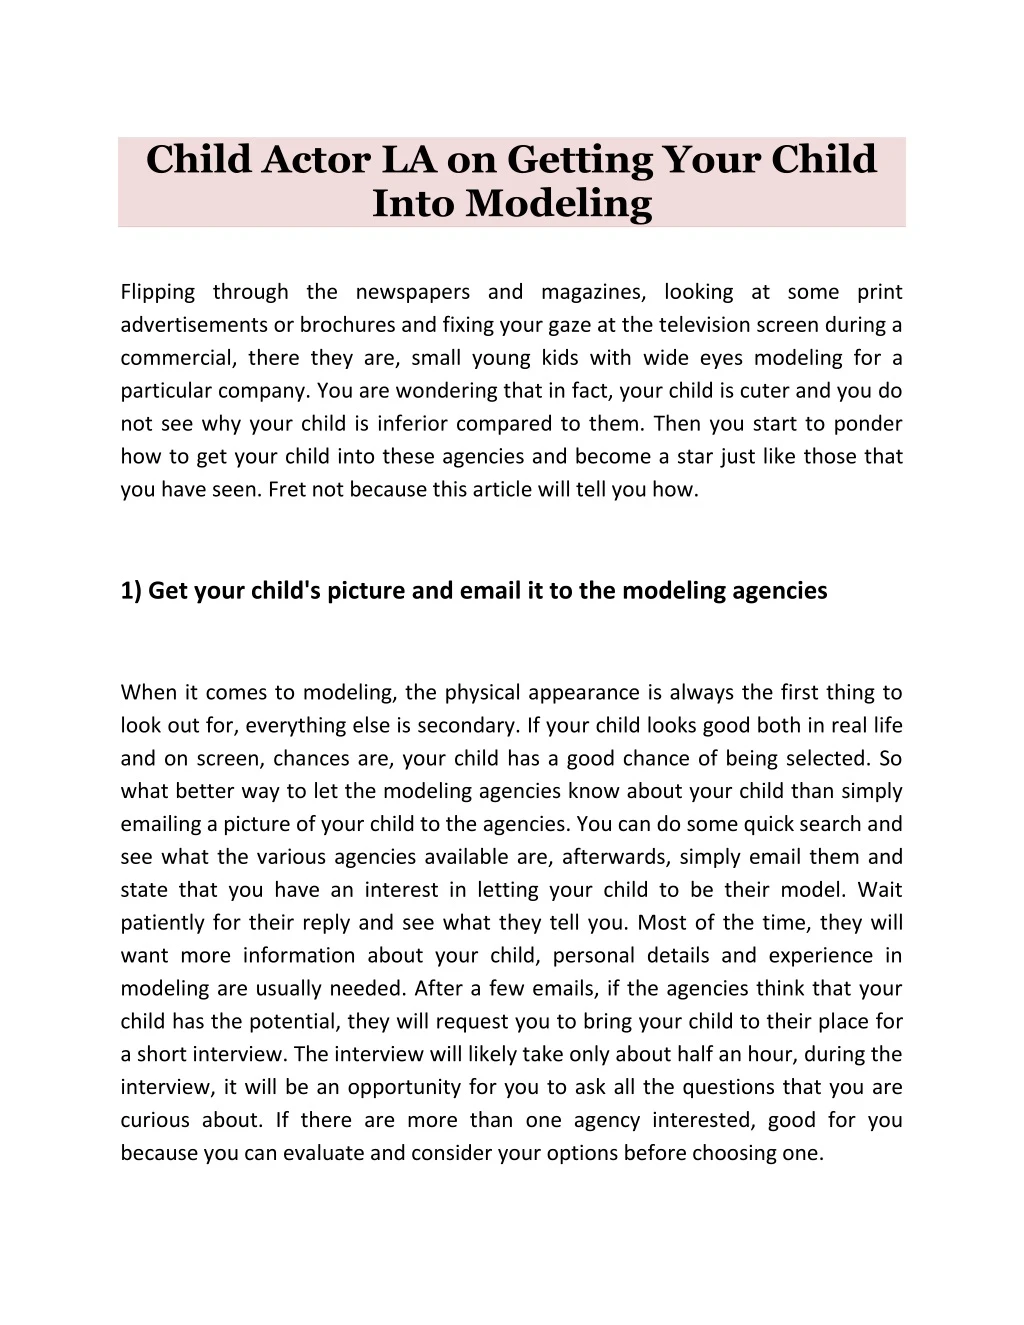 child actor la on getting your child into modeling